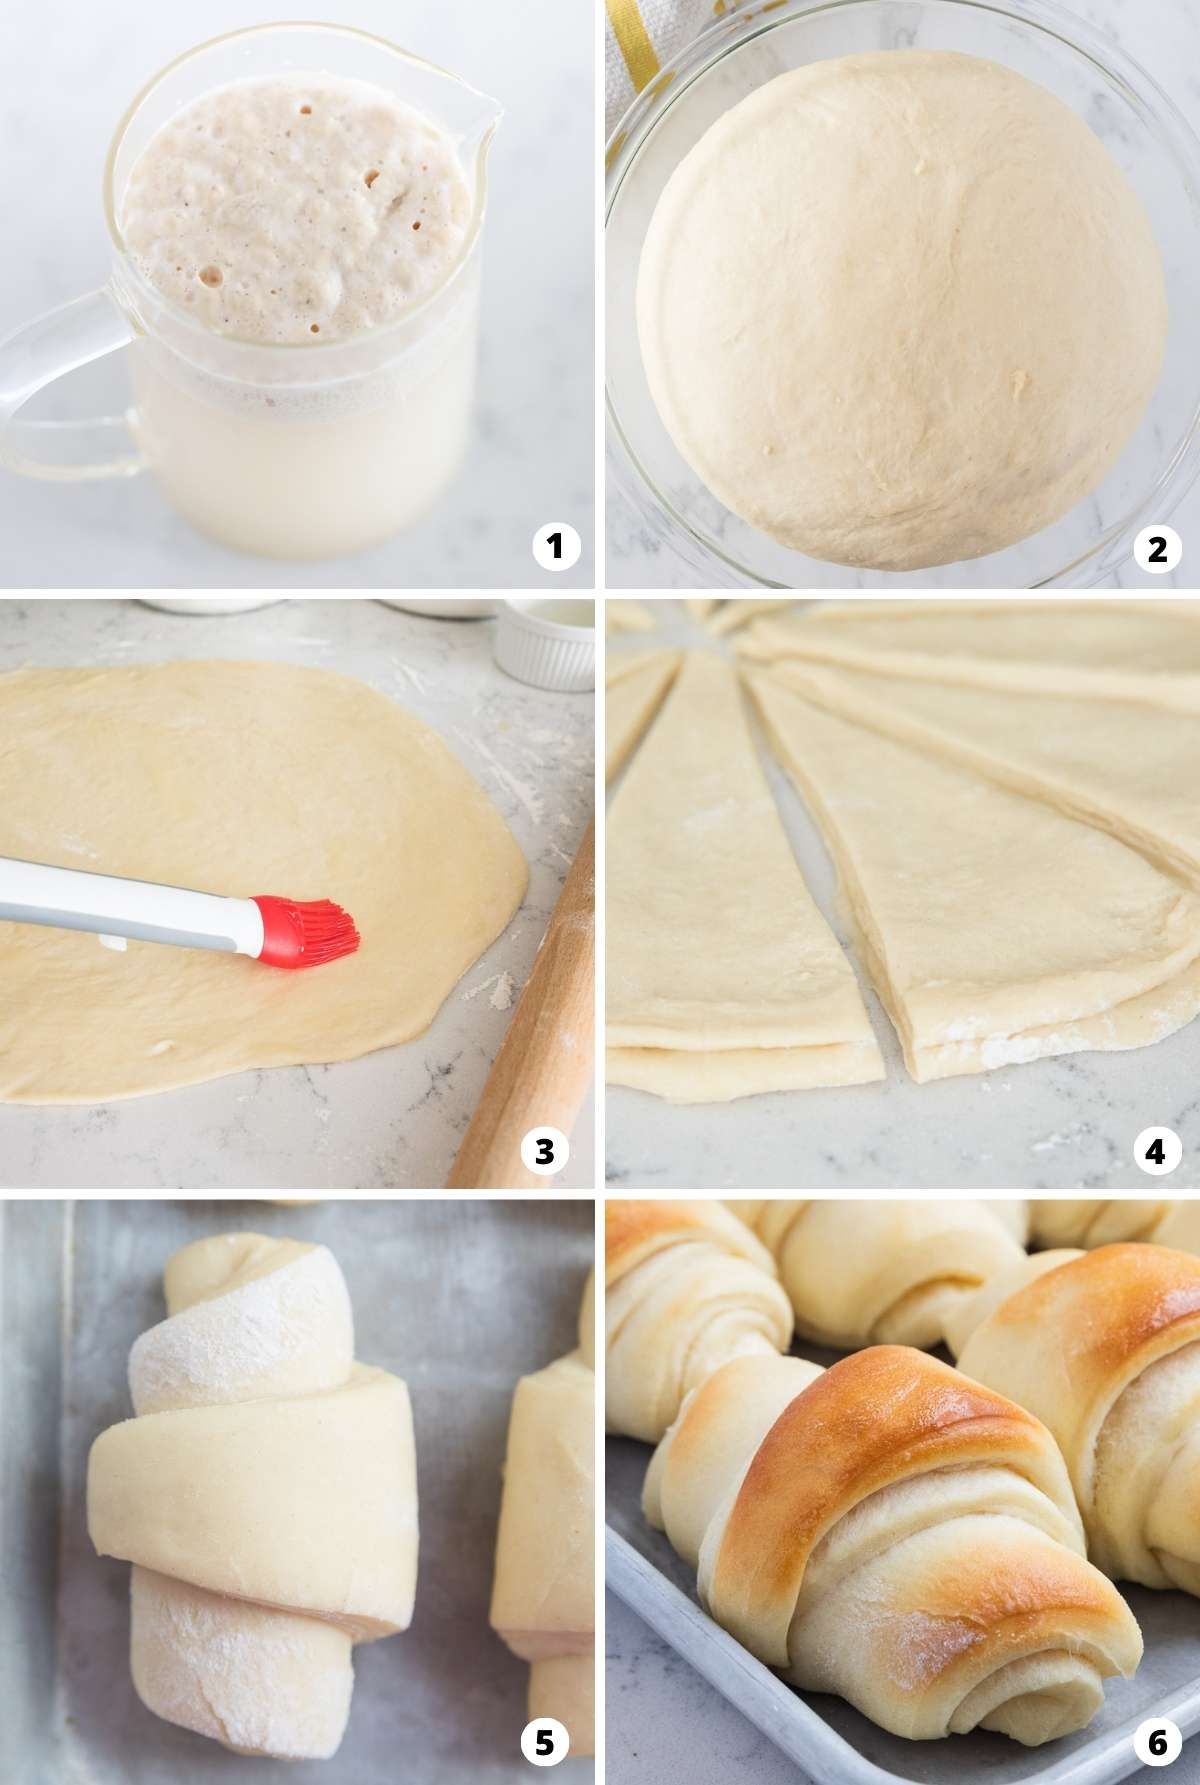 Showing how to make potato rolls in a 6 step collage.